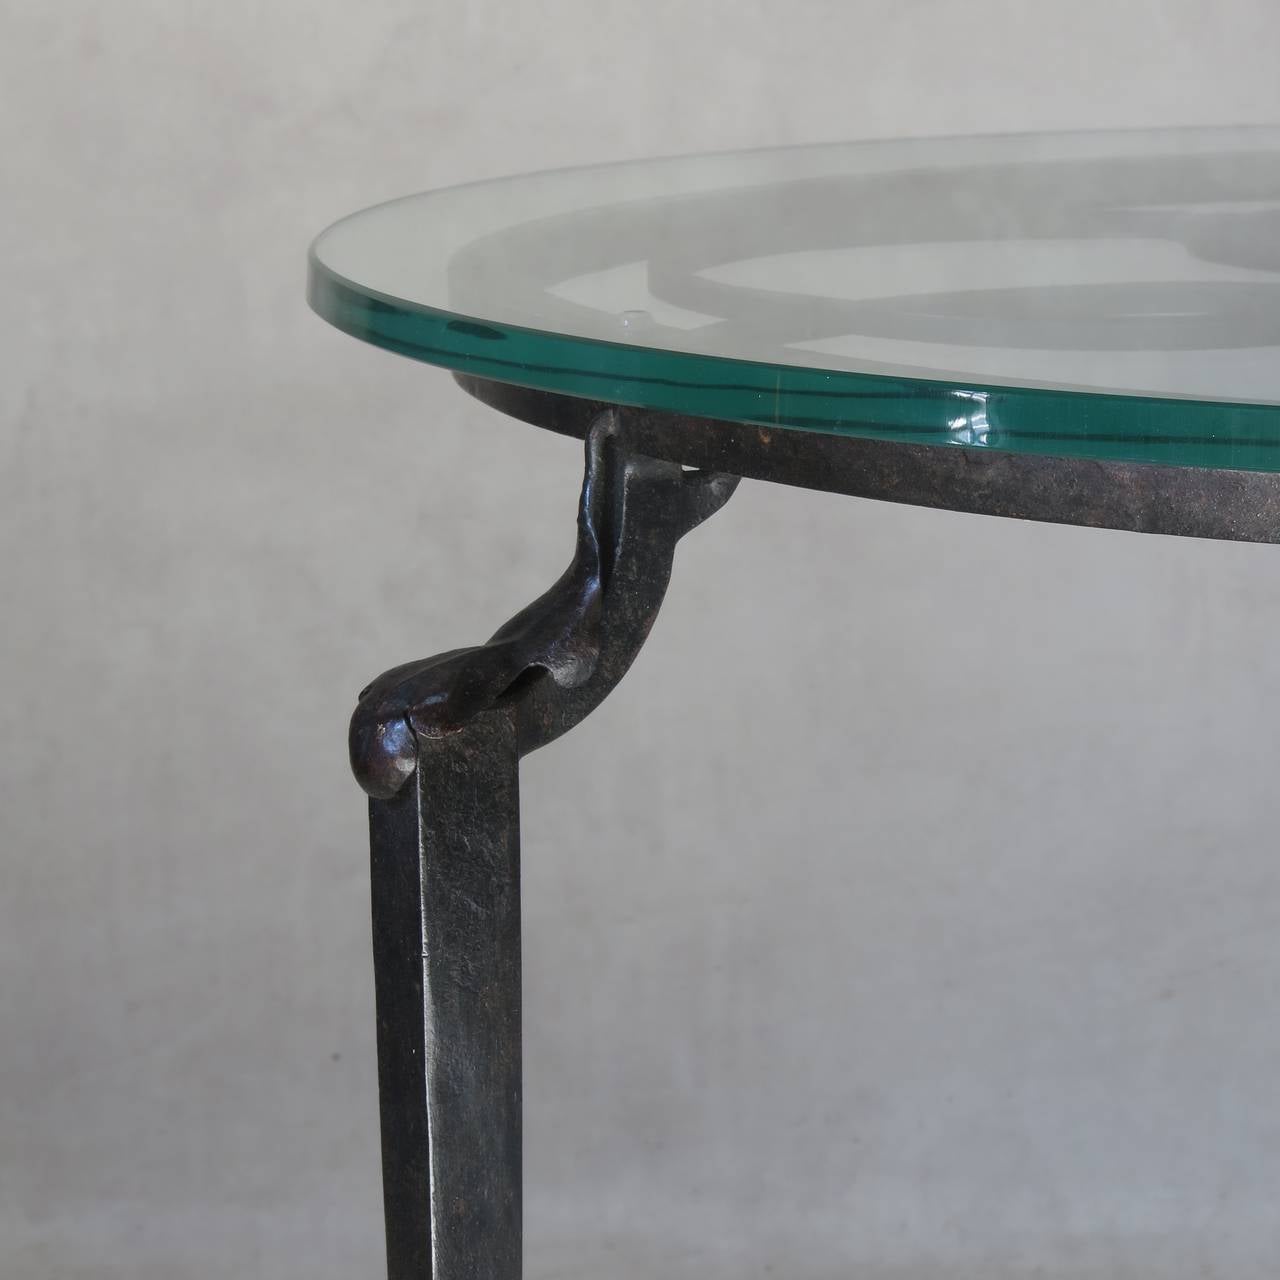 20th Century French Monogrammed Wrought Iron Coffee Table with Glass Top, circa 1930s